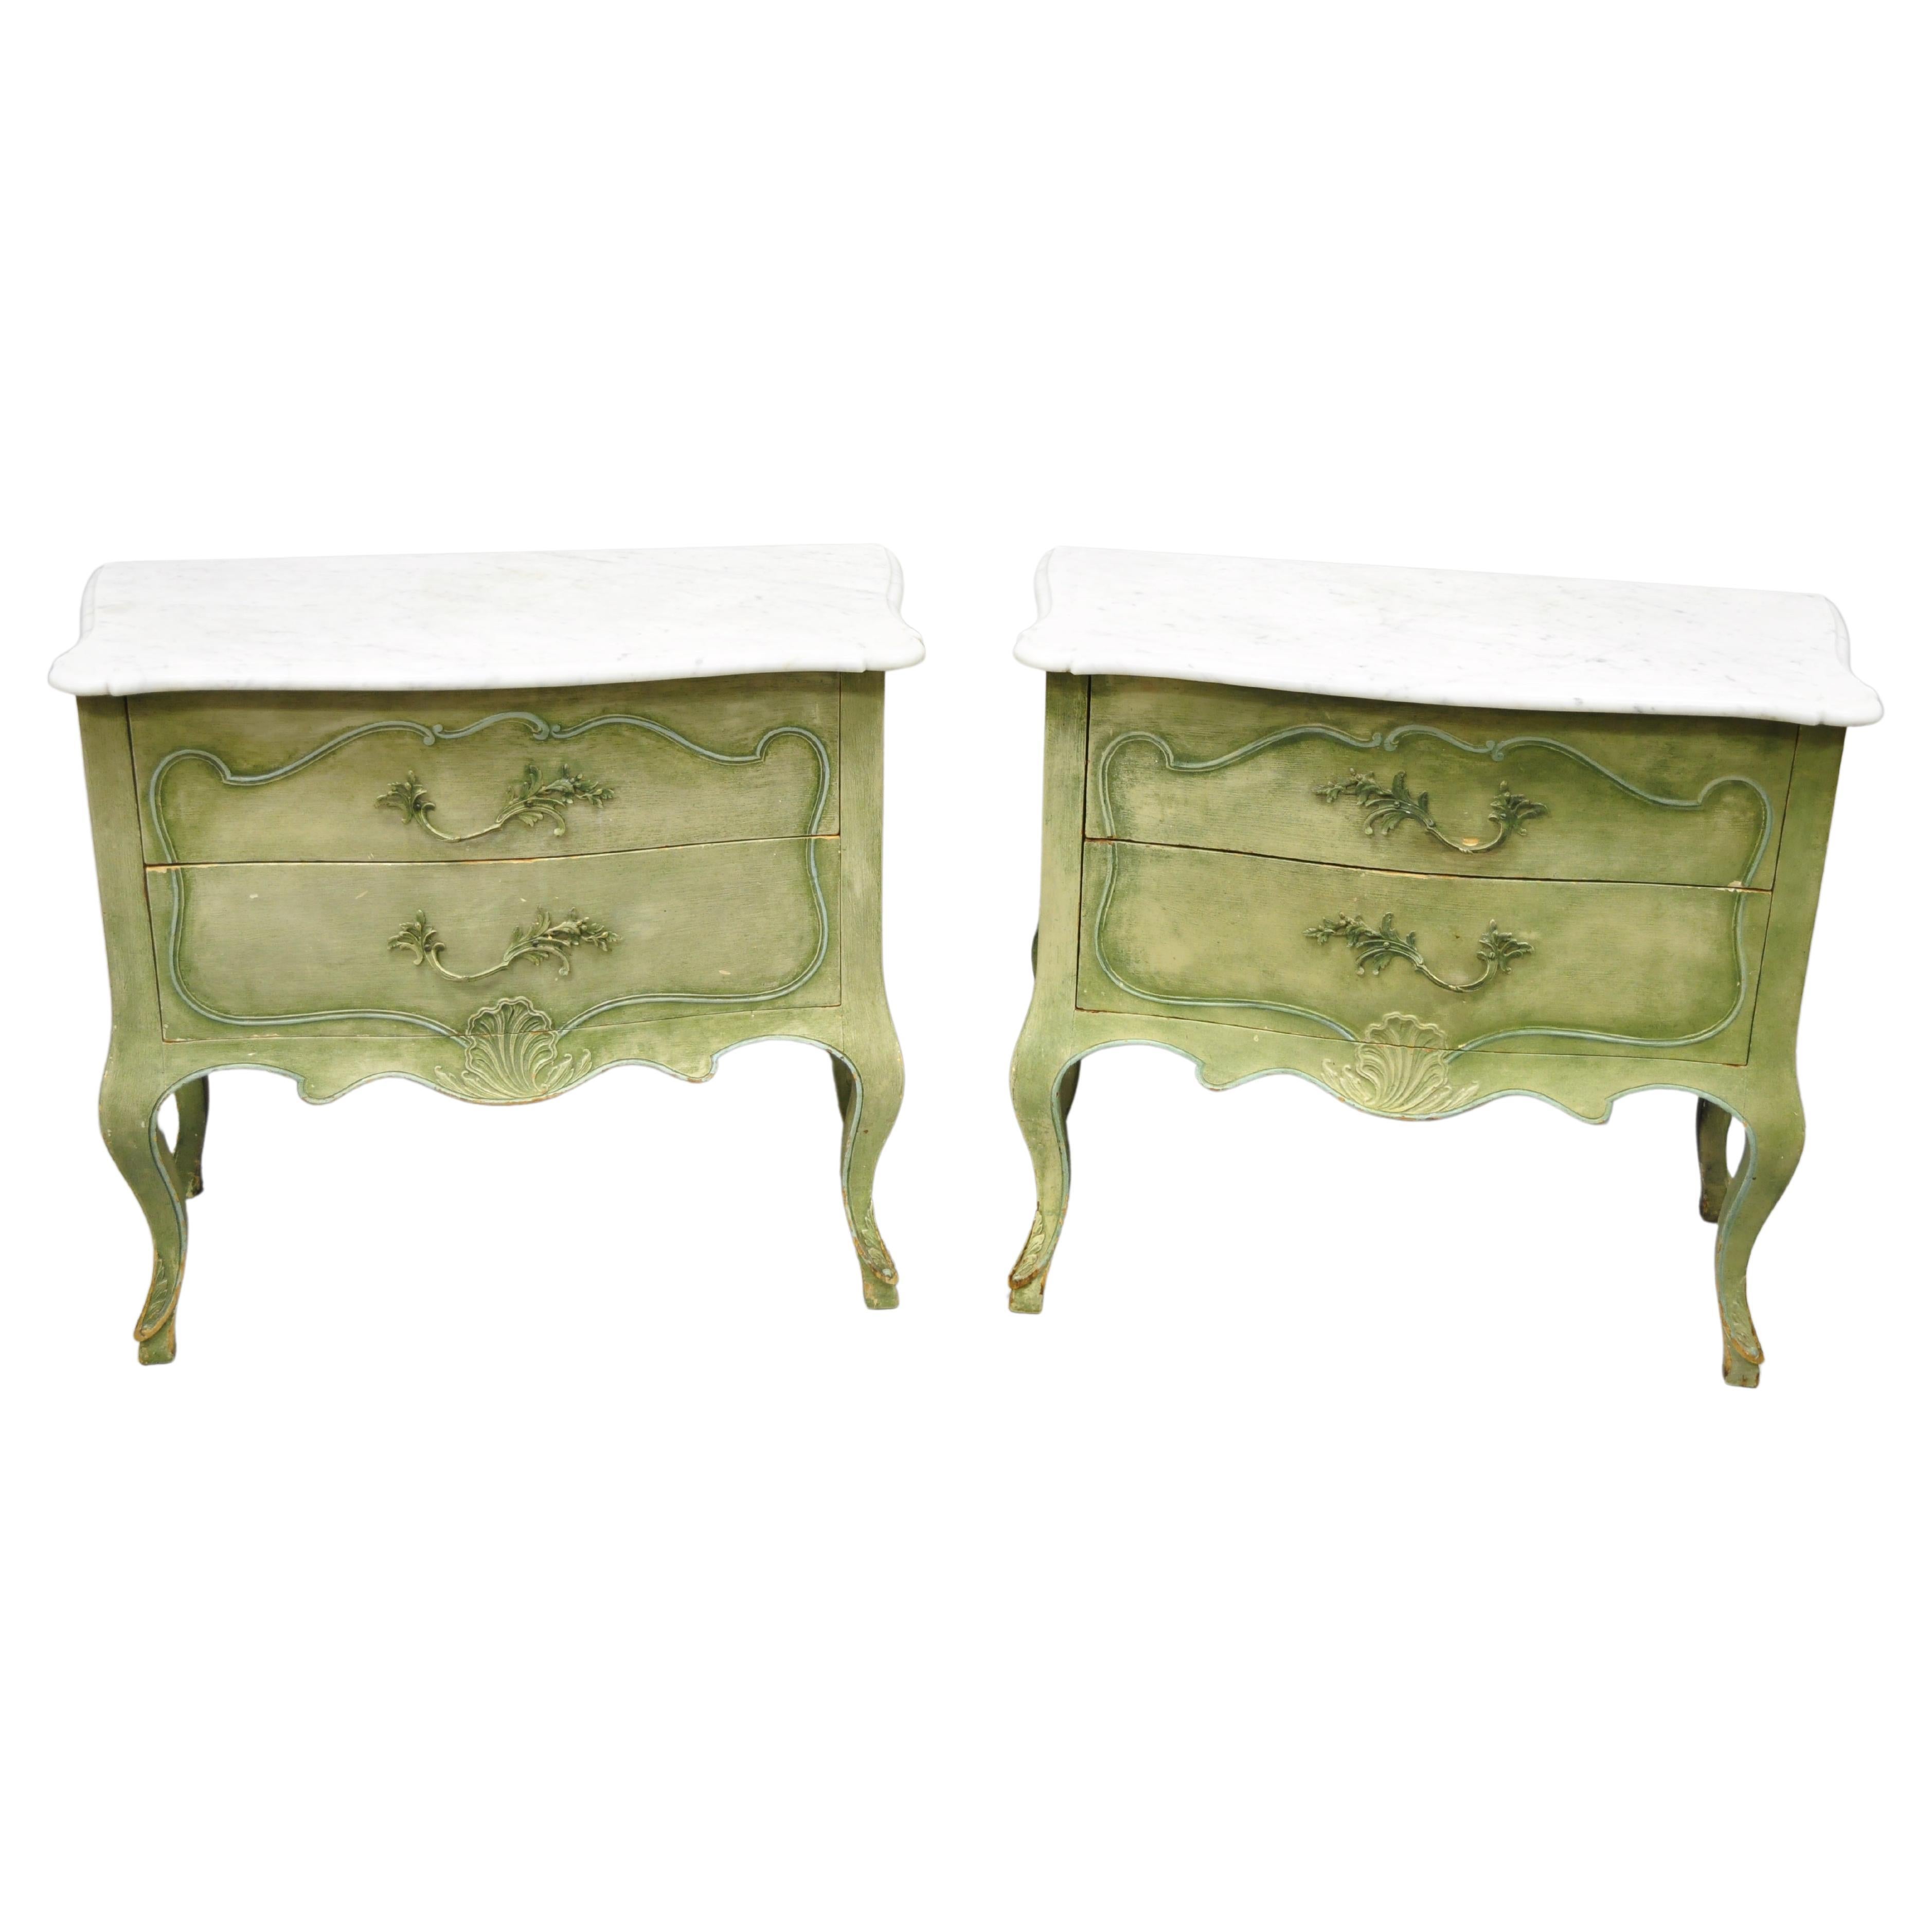 Vintage Italian Regency marble top green distress painted commode nightstands - a pair. Item features shaped marble tops, green distress painted finish, cabriole legs, solid brass hardware, very nice antique pair, great style and form. Circa mid